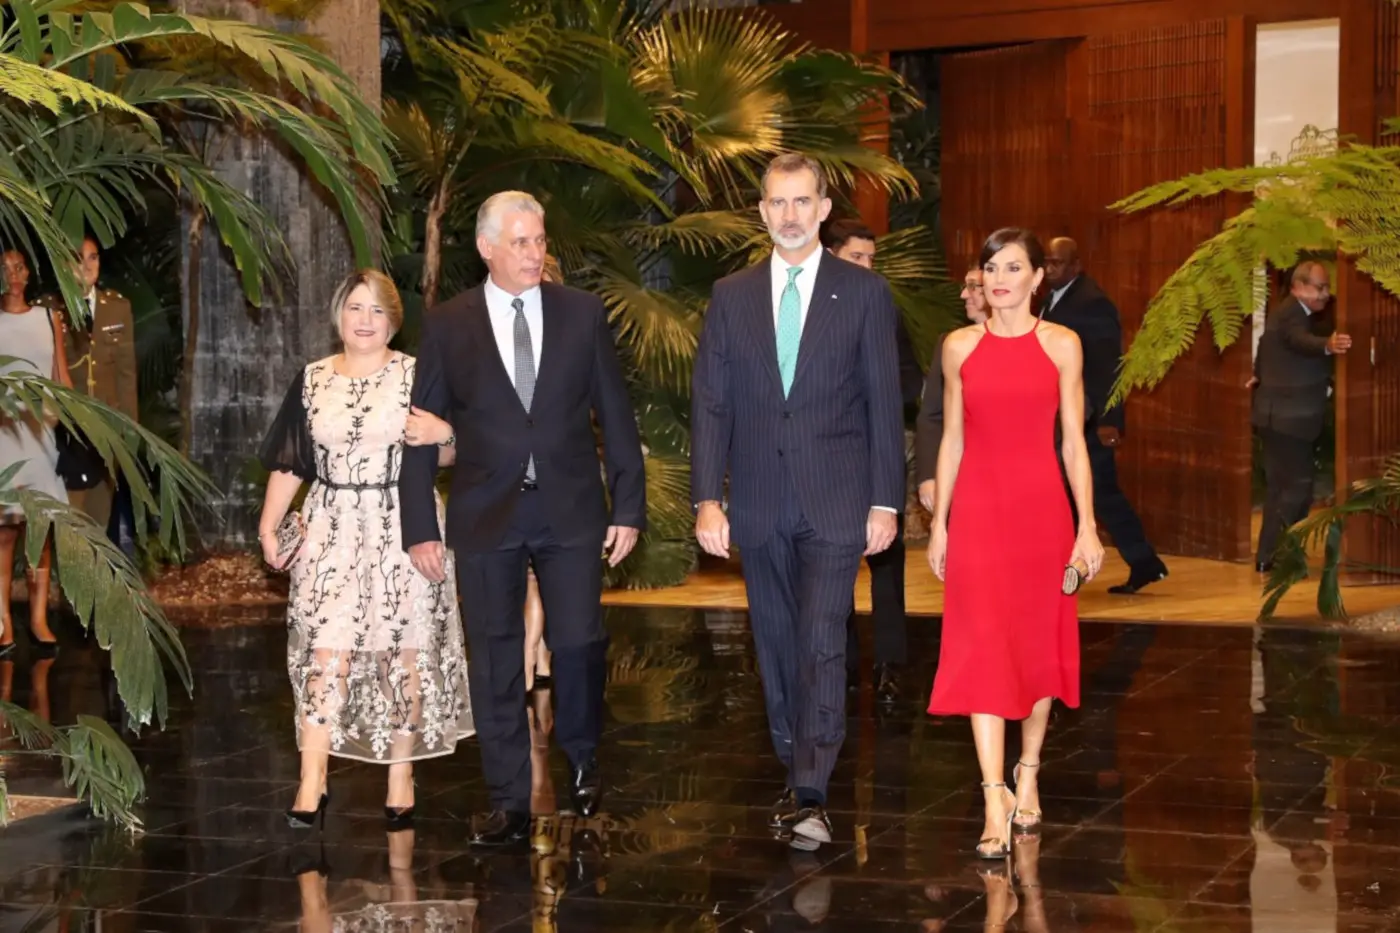 King Felipe and Queen Letizia attended Ballet Gala in Cuba on day 1 of State visit